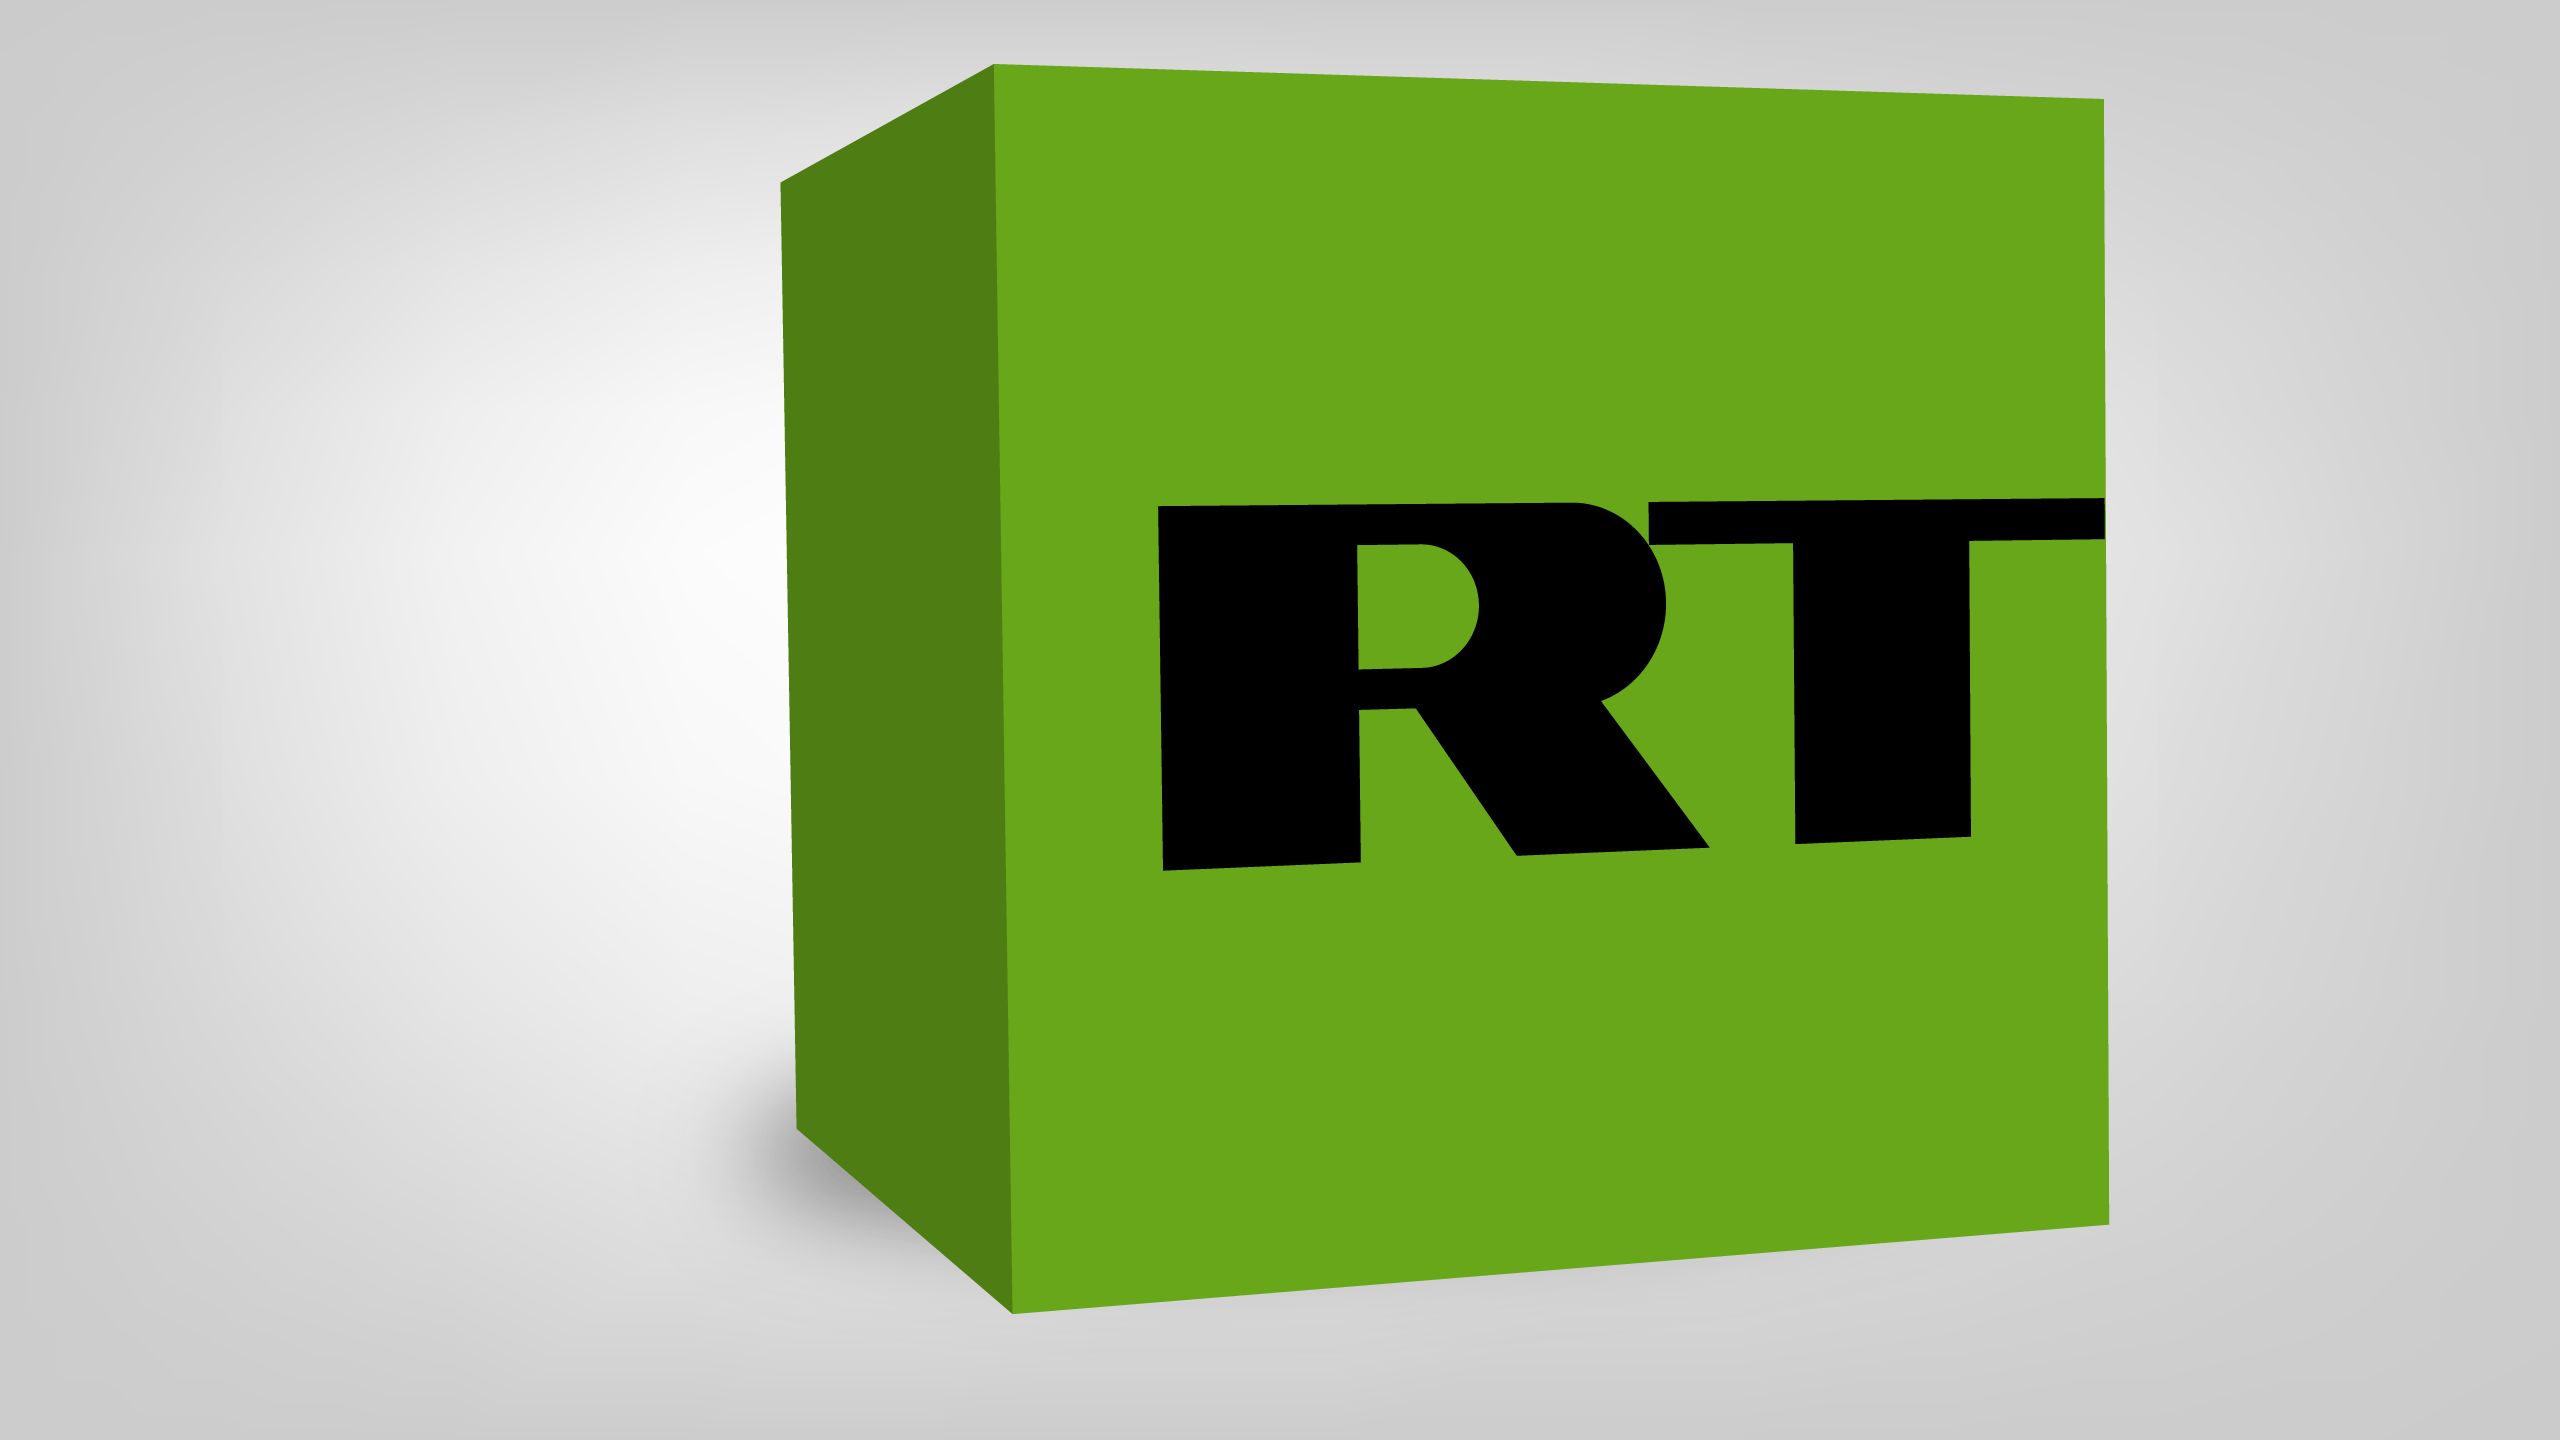 Unblocked Logo - Russia-backed RT unblocked on Facebook, claims Dataminr also revoked ...